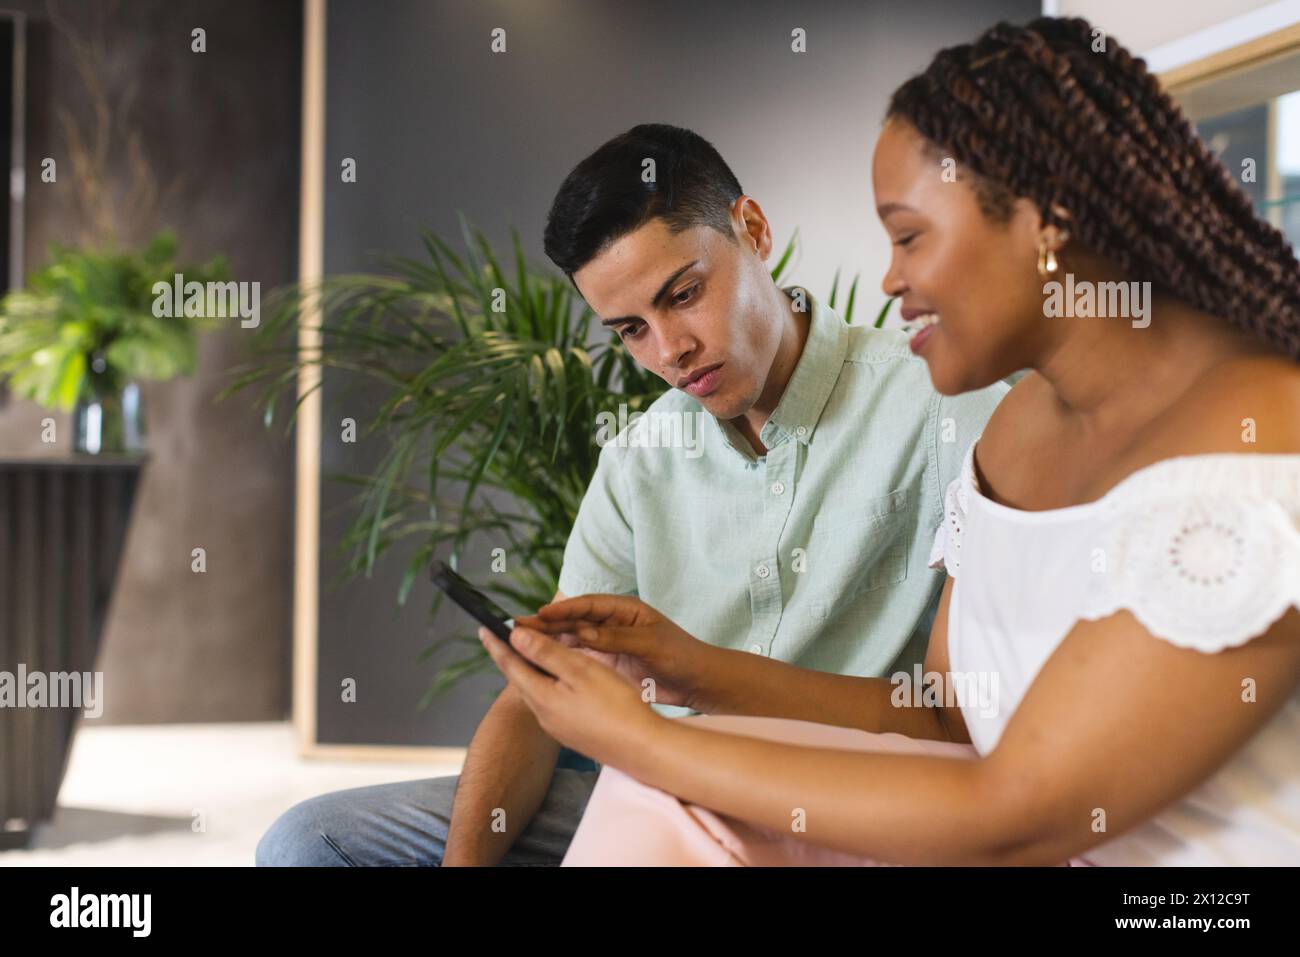 Biracial colleagues looking at smartphone together in a modern business office Stock Photo